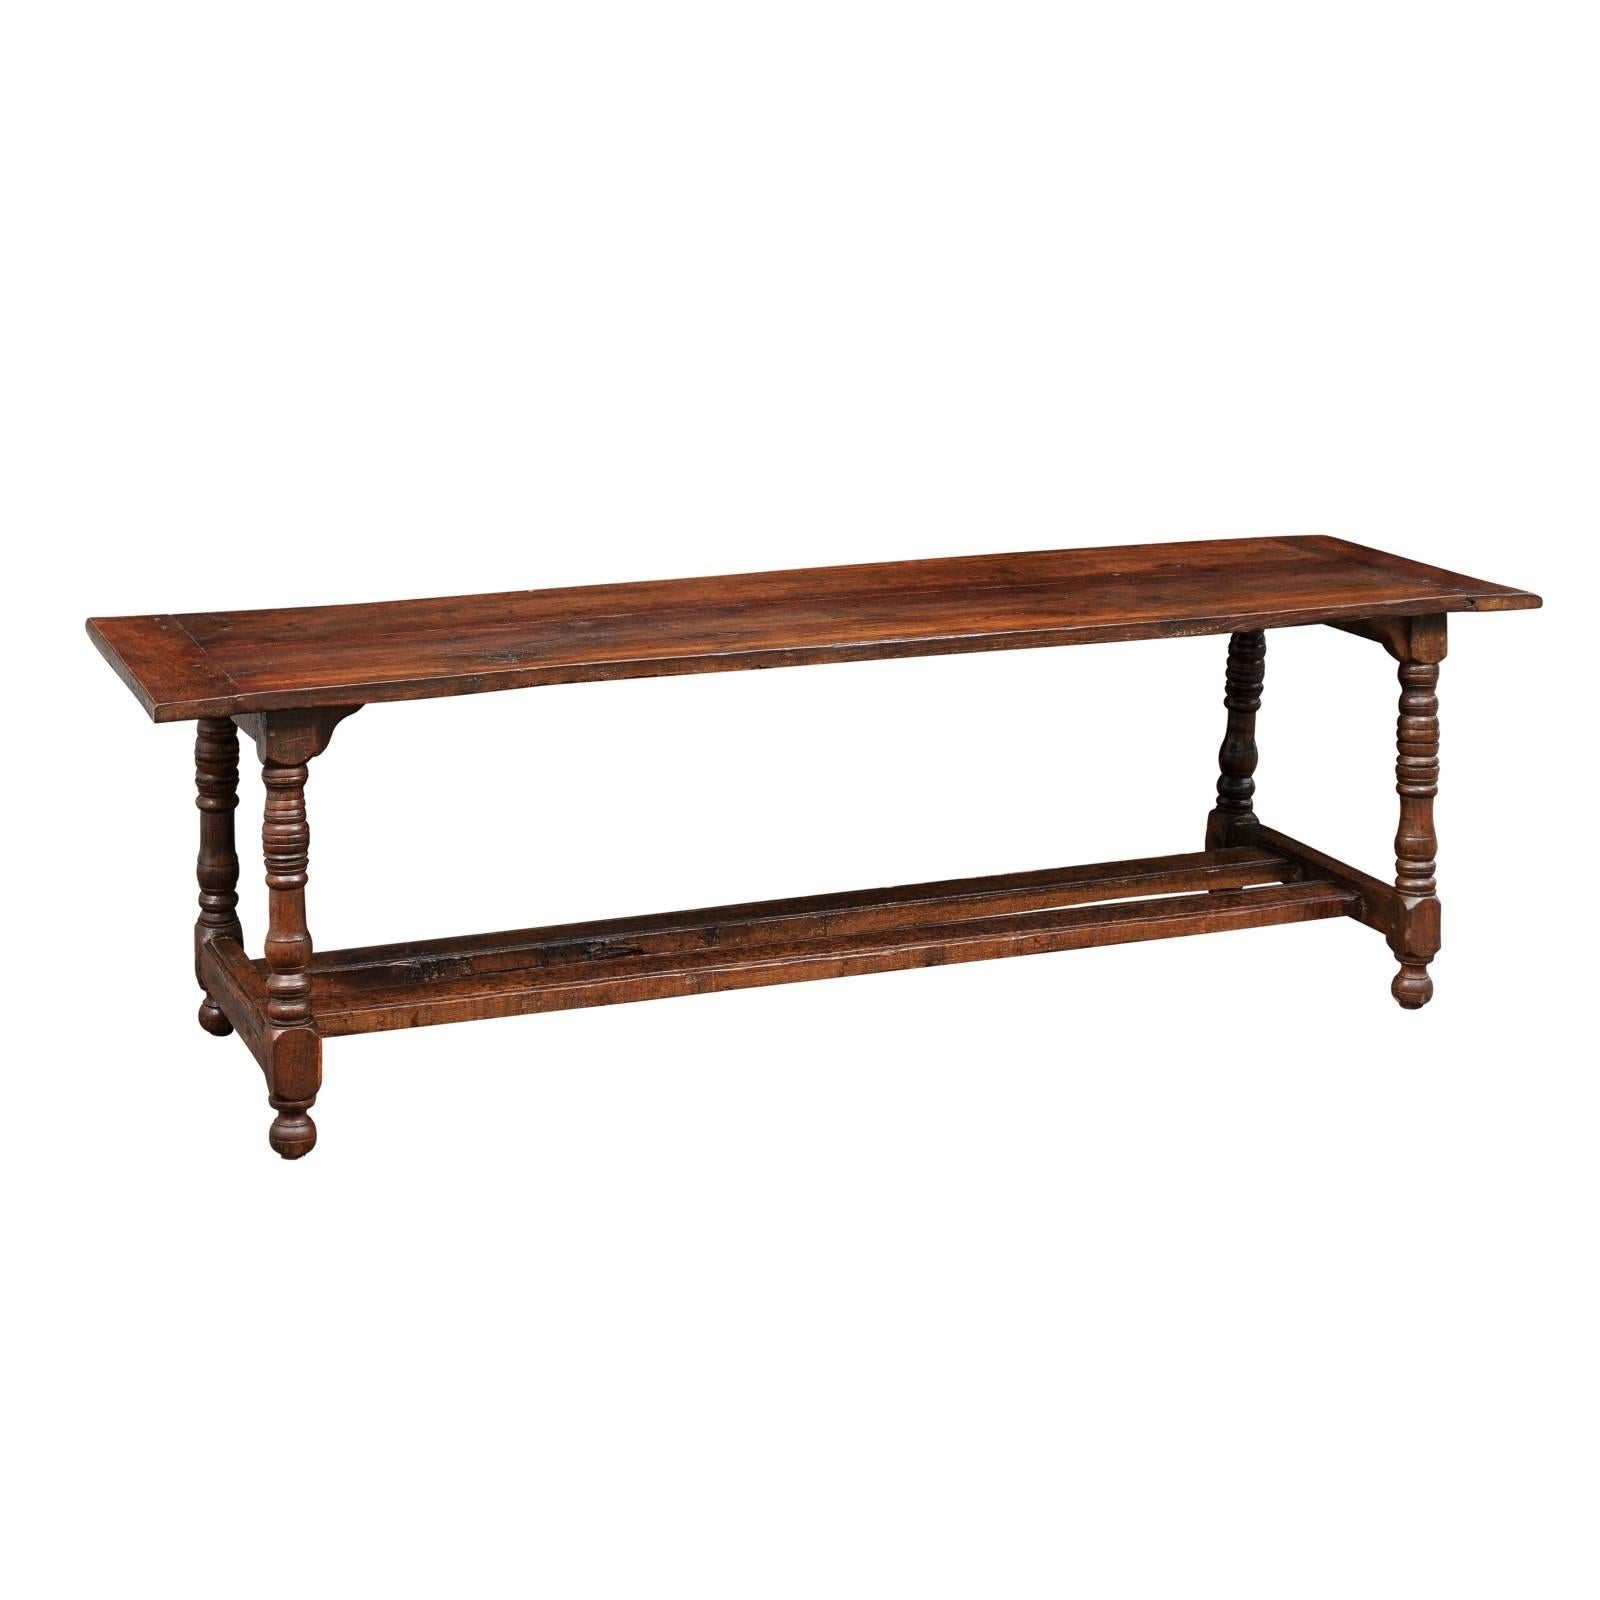 French Oak Coffee Table on Turned Legs with Double Cross Stretcher circa 1880